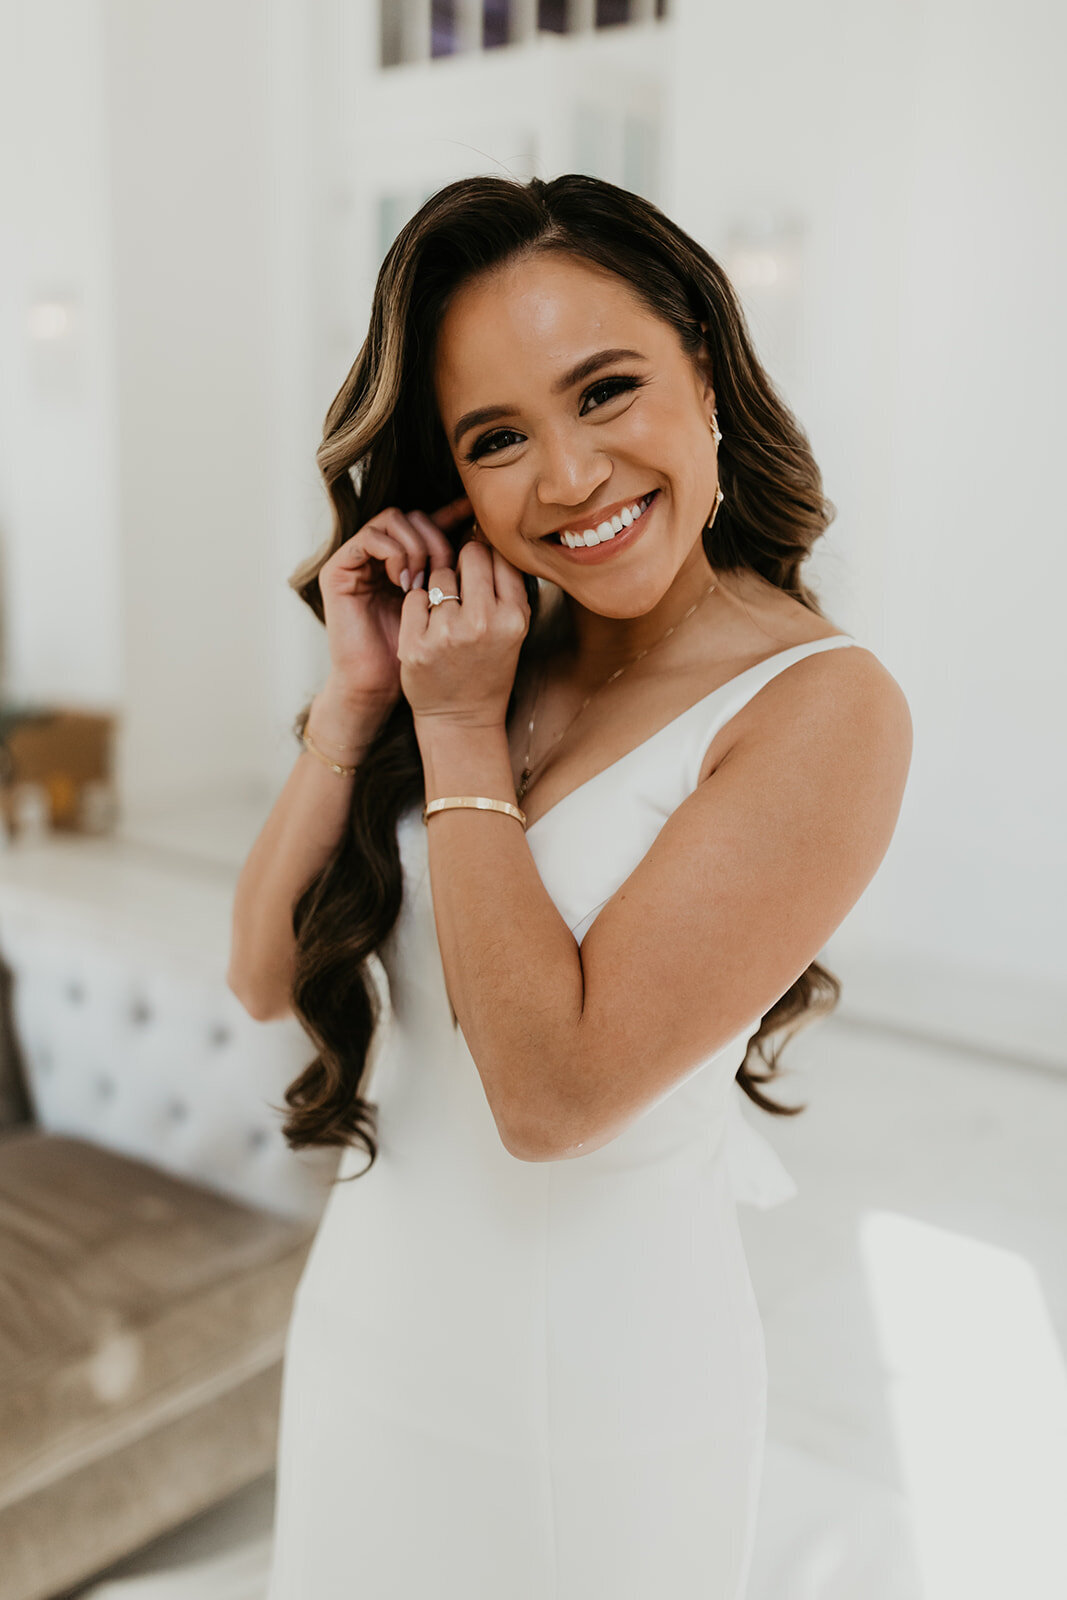 Asian Bride putting on earrings smiling at camera